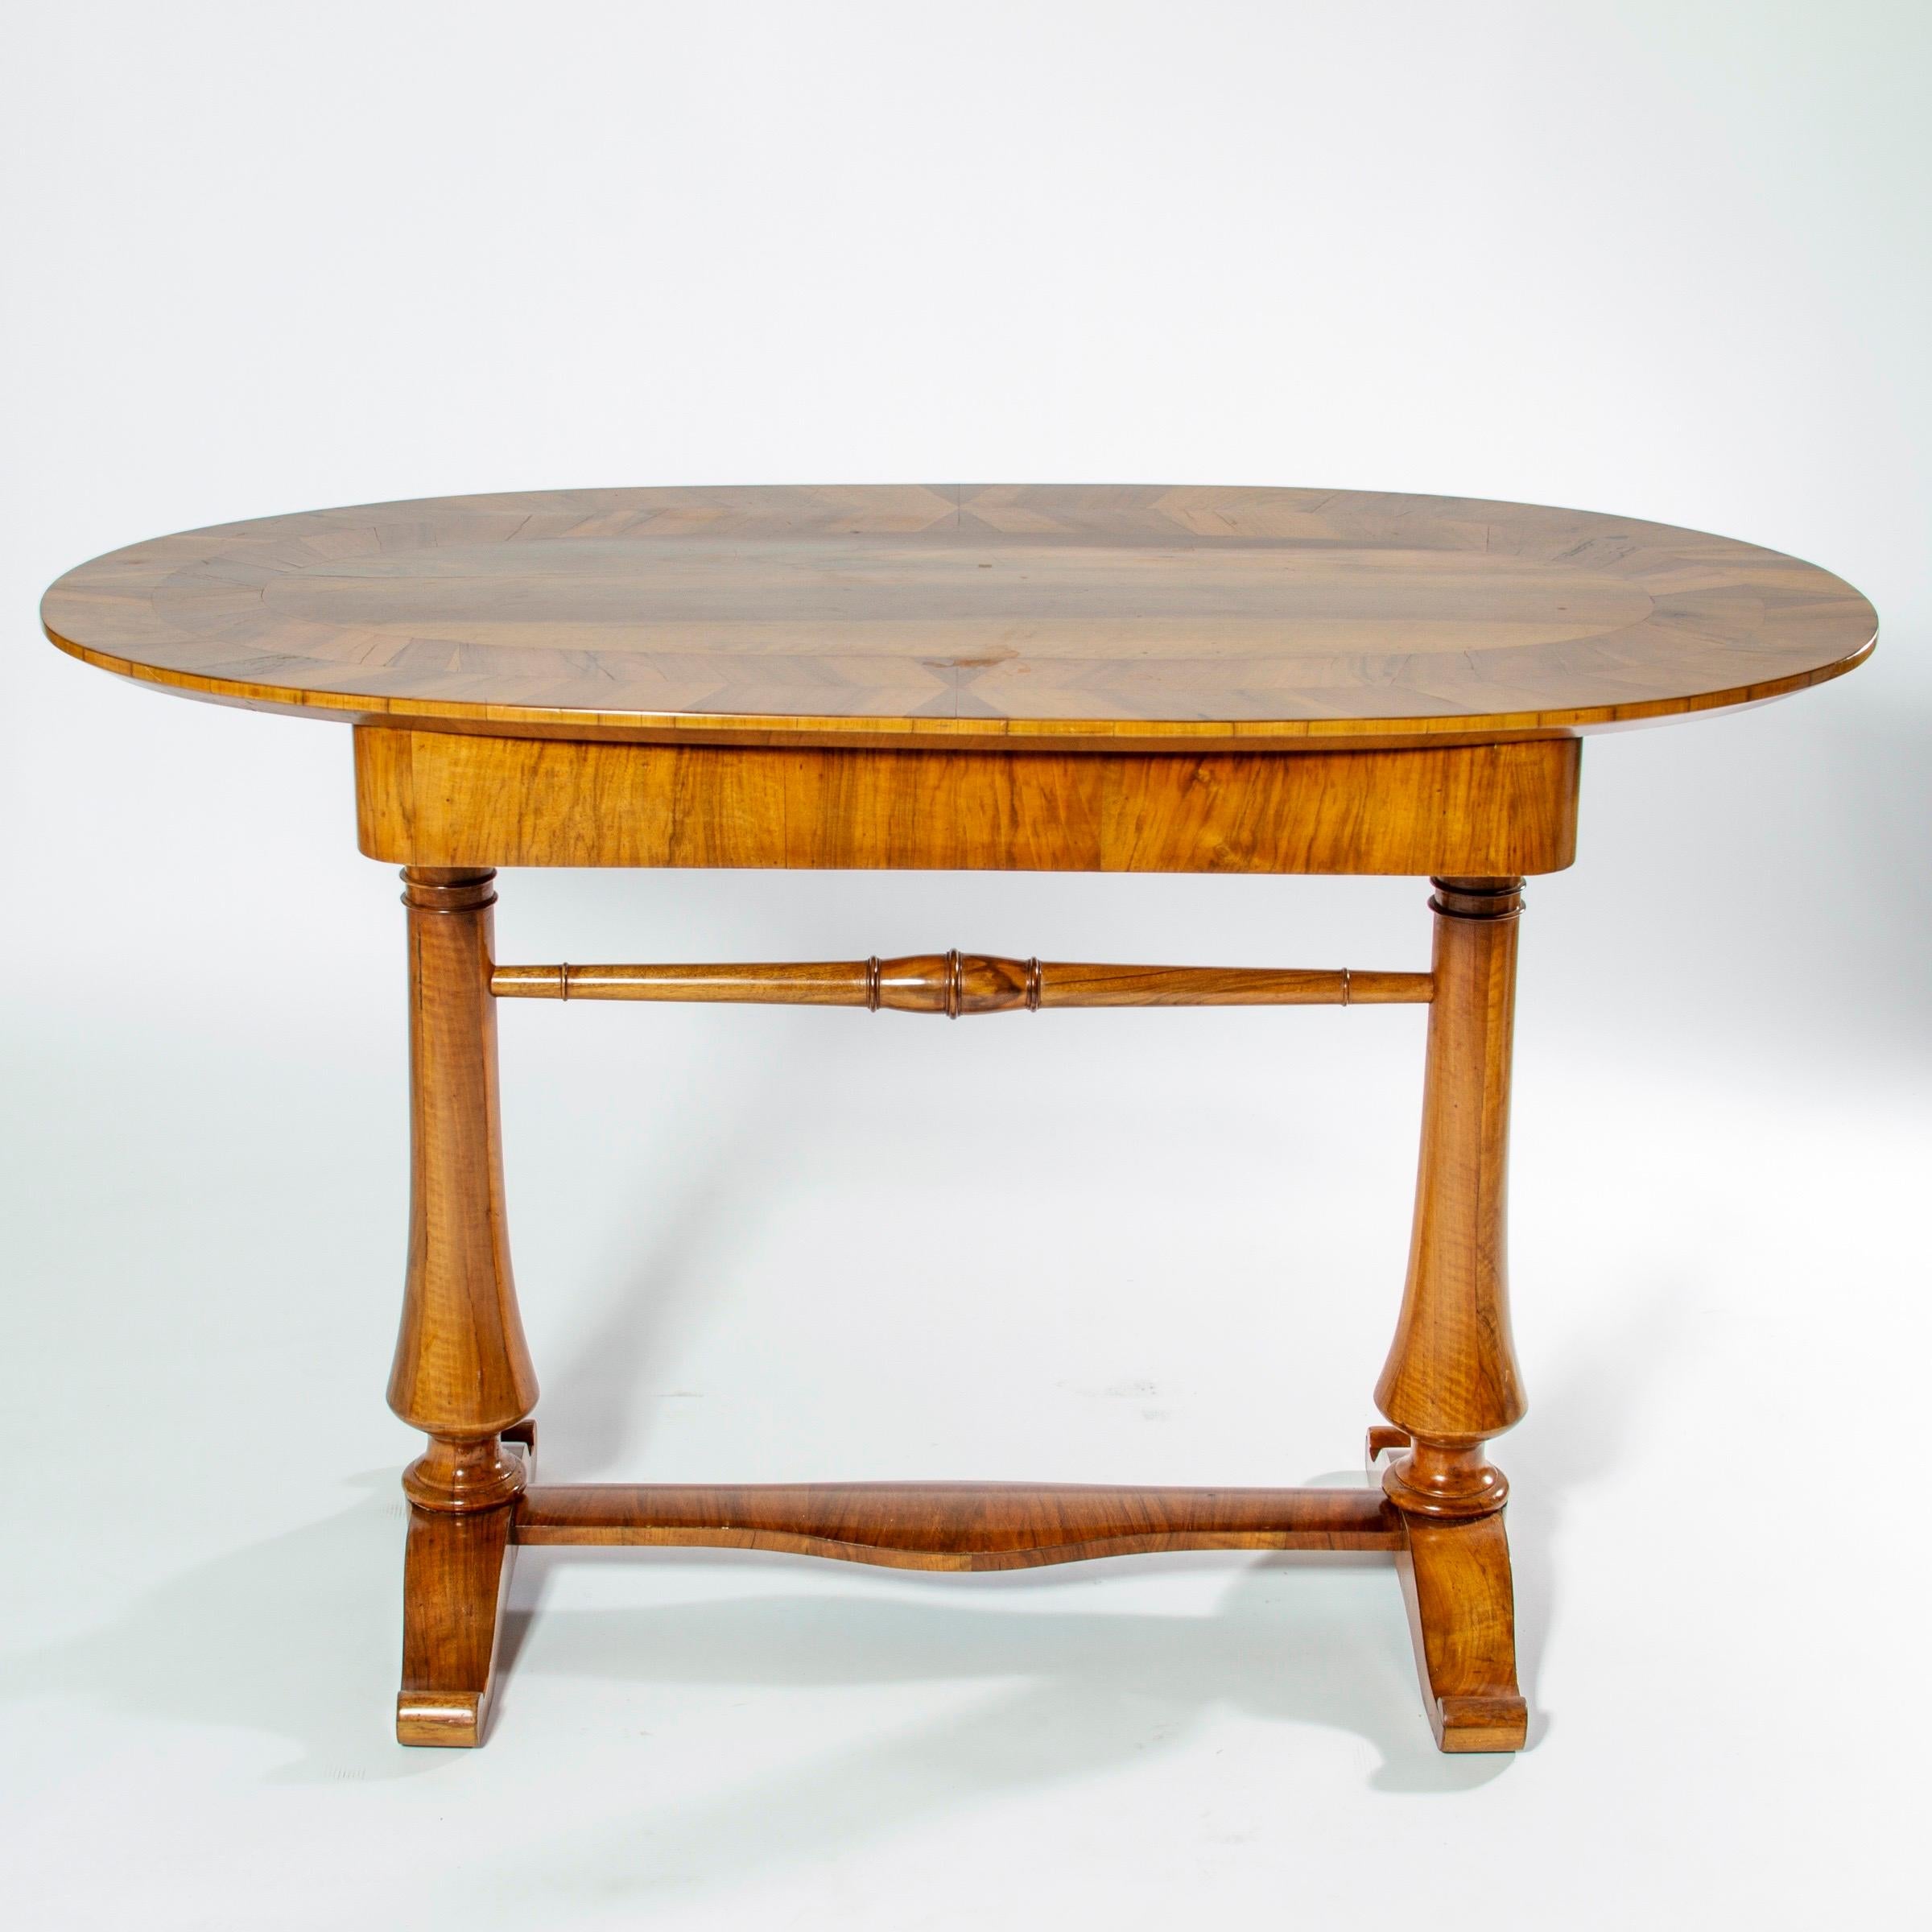 Swedish Biedermeier Oval Desk or Table with Drawer, 19th Century, Sweden  For Sale 3